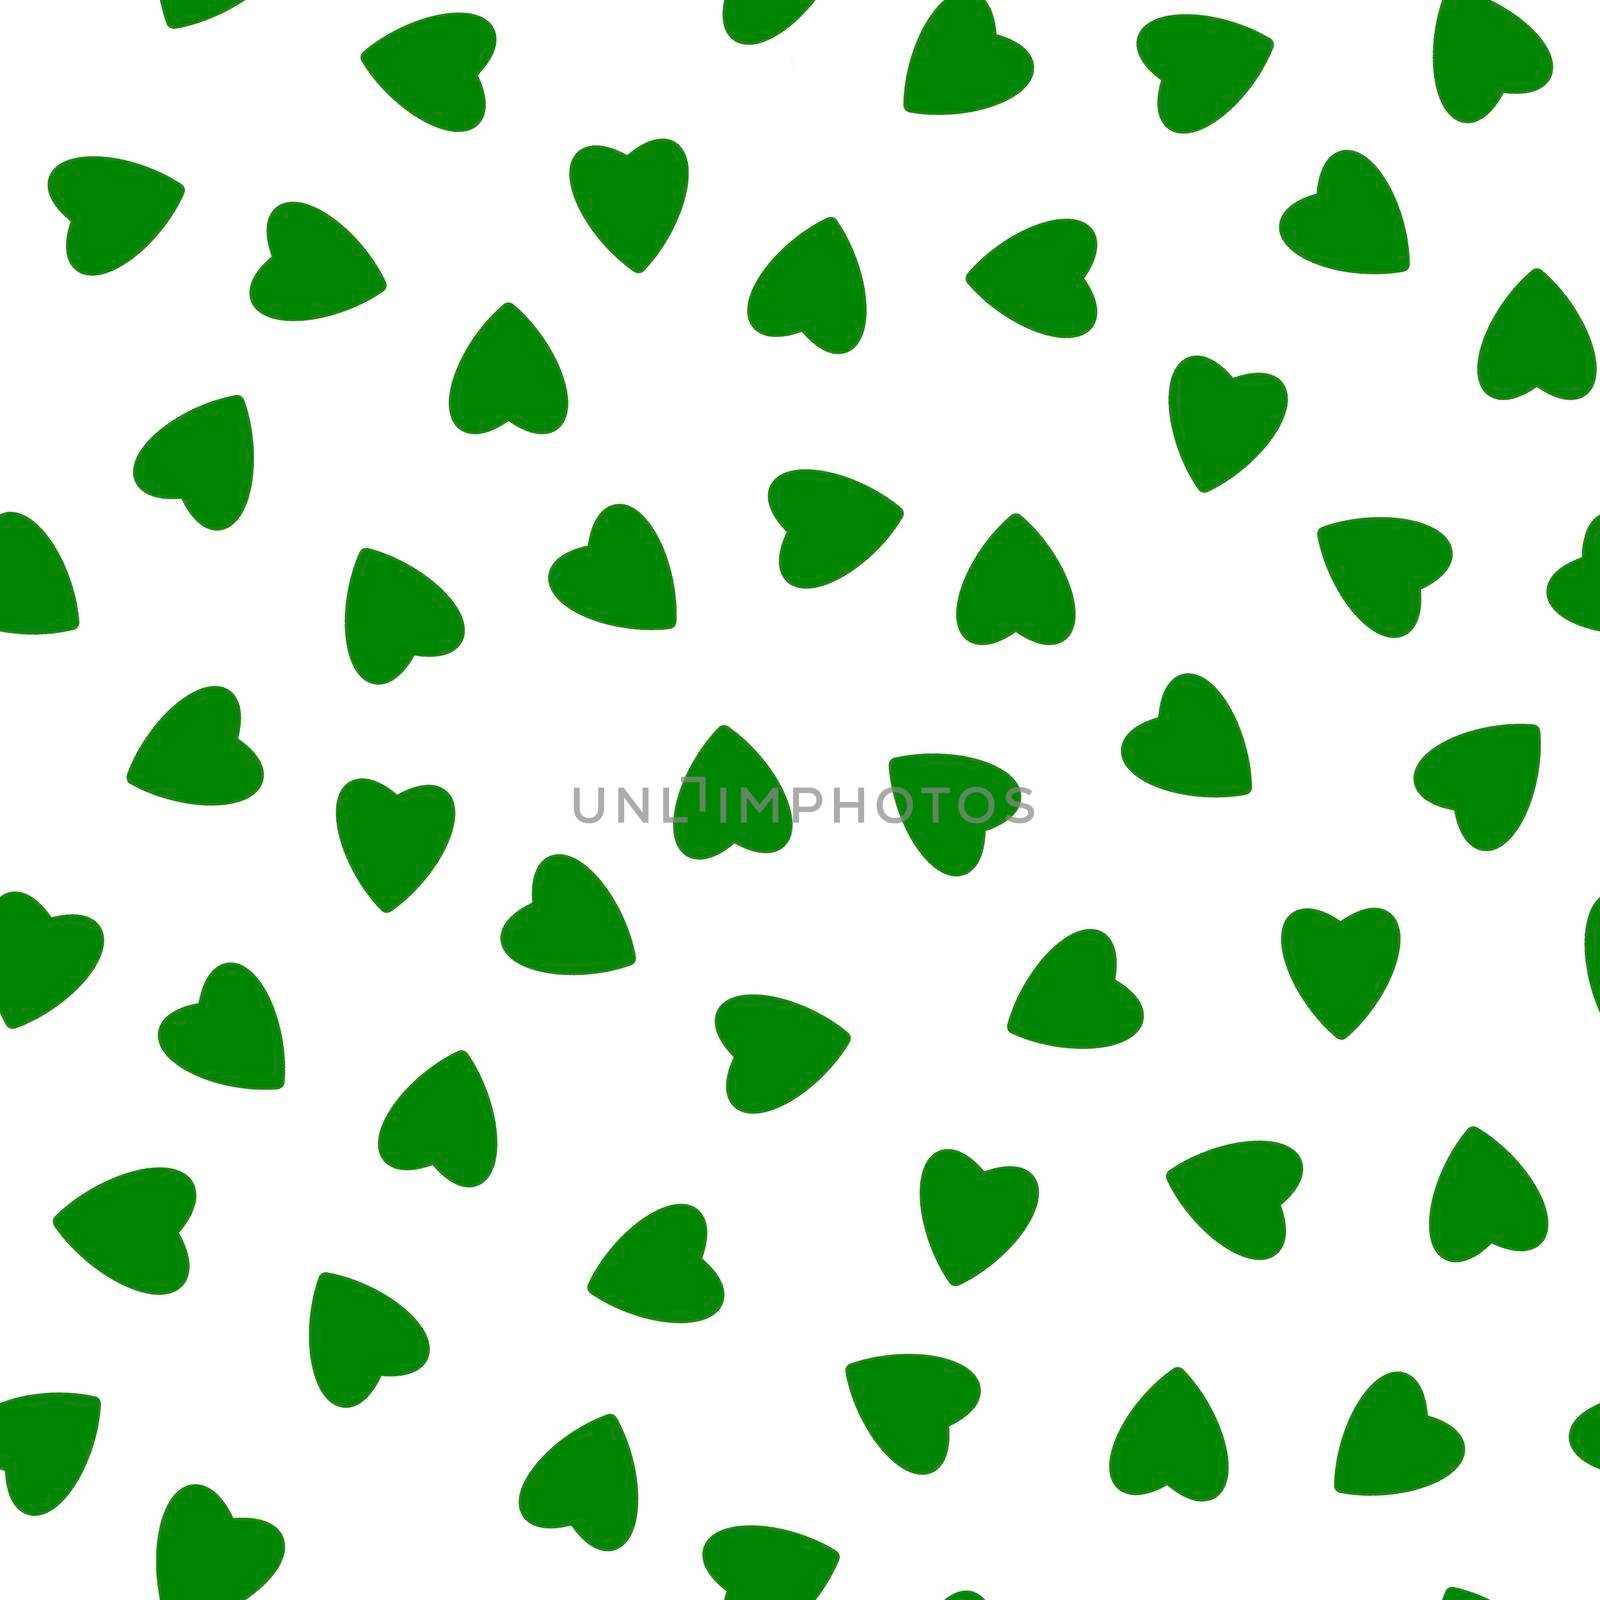 Simple hearts seamless pattern,endless chaotic texture made of tiny heart silhouettes.Valentines,mothers day background.Great for Easter,wedding,scrapbook,gift wrapping paper,textiles.Green on white.